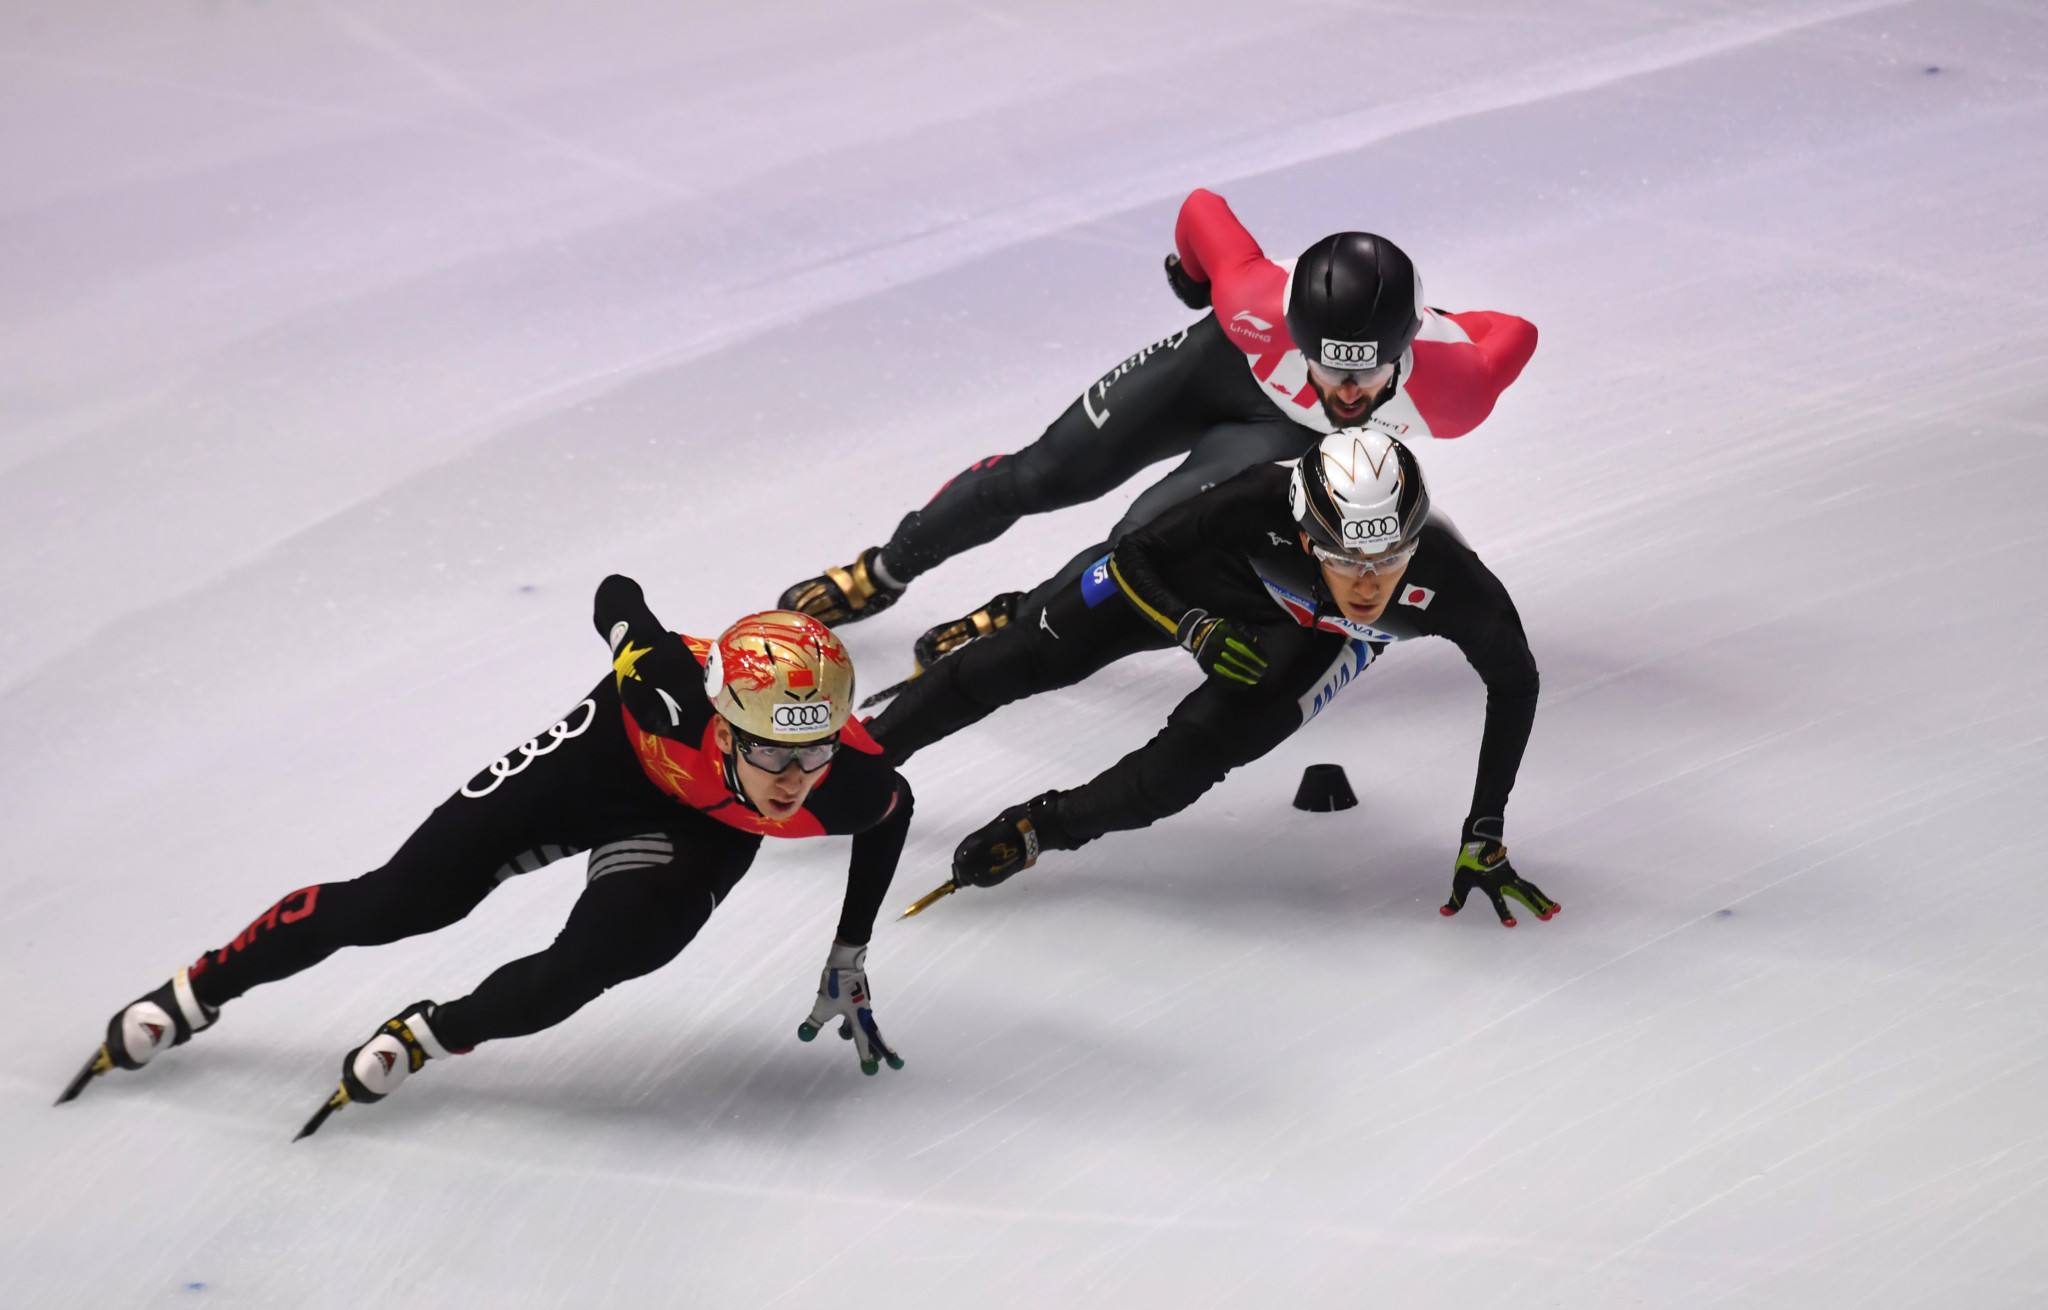 Olympic silver medallist Wu qualifies quickest at ISU Short Track World Cup